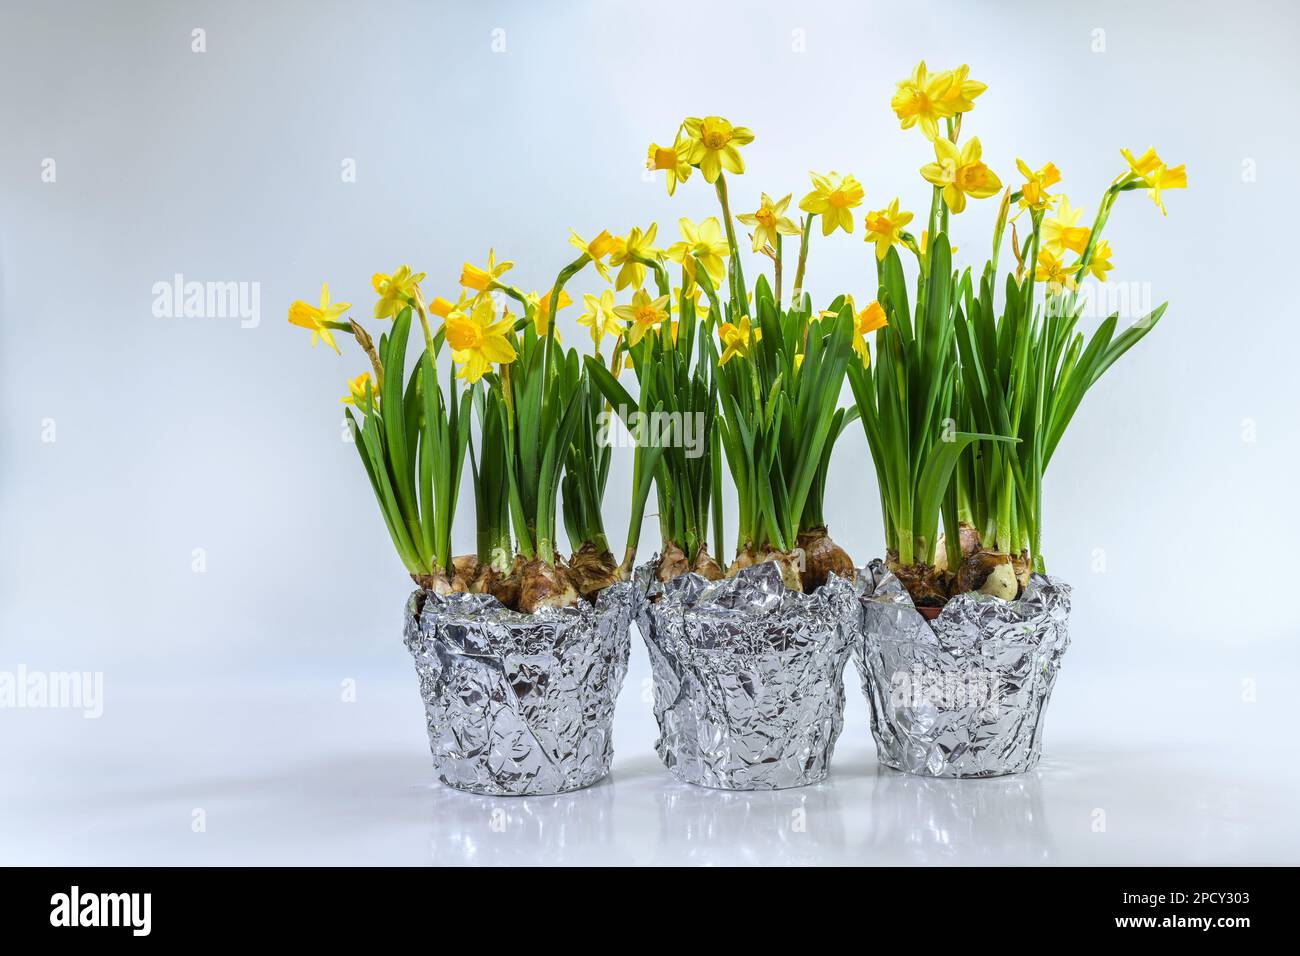 Three plant pots with blooming daffodils as spring decoration. After flowering, the bulbs can be planted in the garden for new flowers next year. Ligh Stock Photo